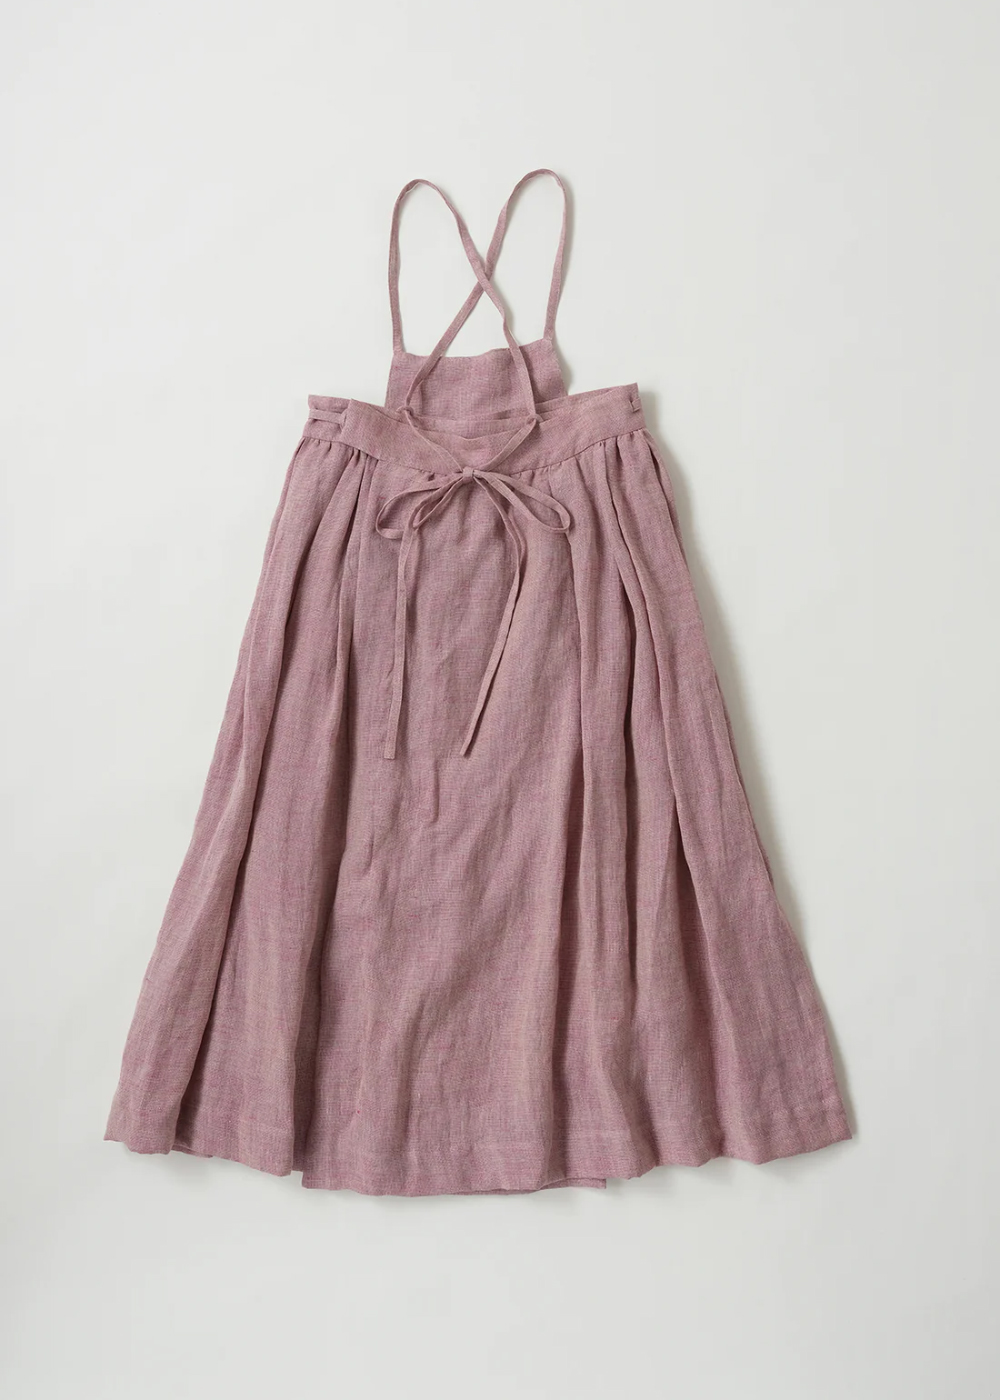 Gathered Apron - 2 colors